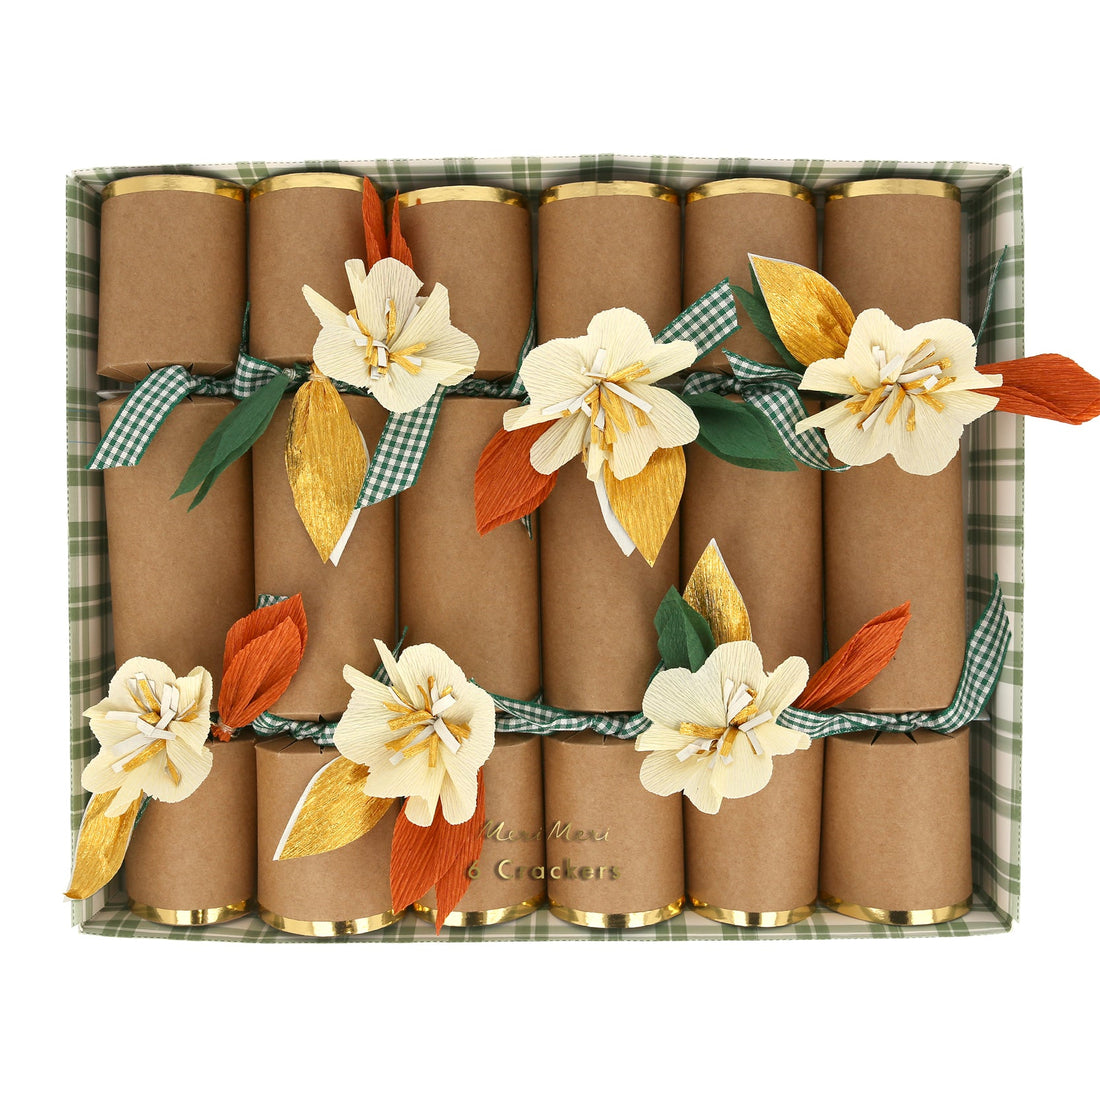 Brown paper cracker embellished with handmade crepe paper flowers and leaves, have gold foil borders and gorgeous green gingham ribbon ties